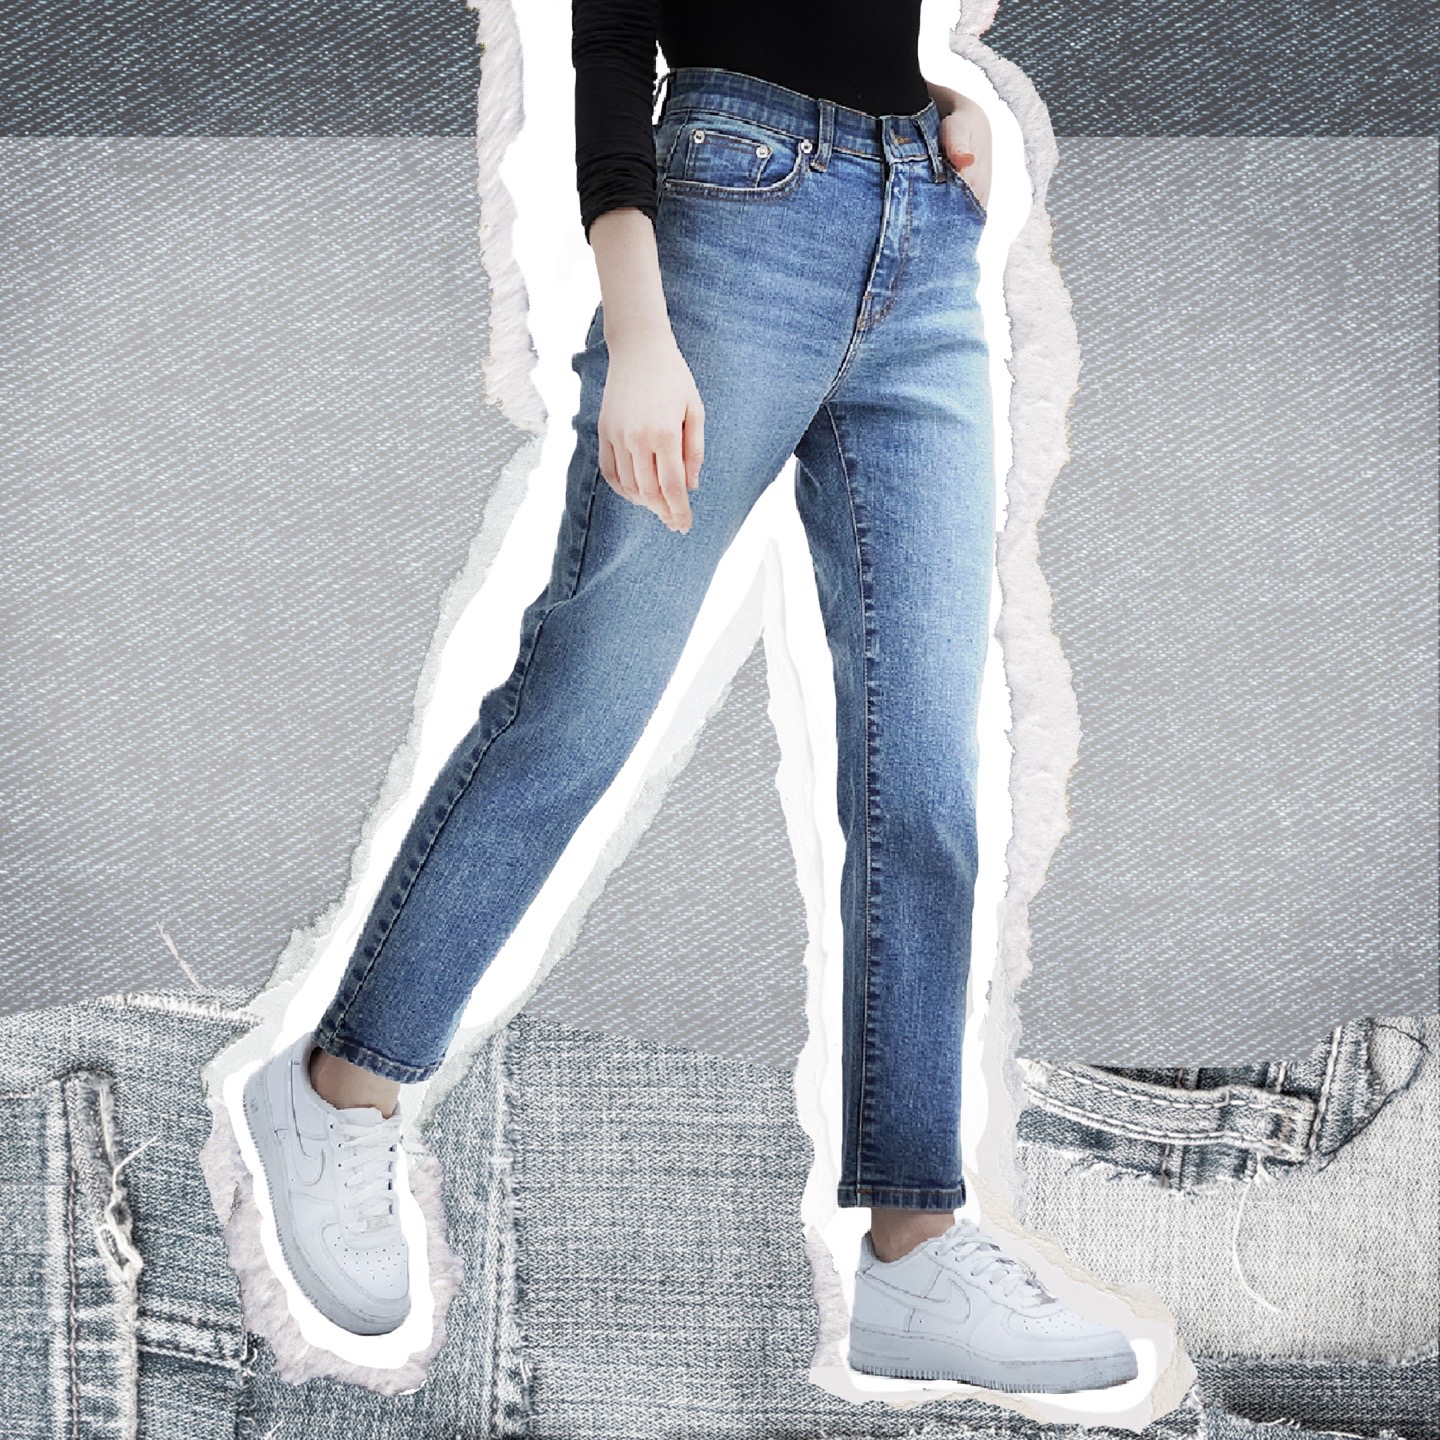 At Kingpins, Hyosung will focus on sustainable denim solutions. © Hyosung